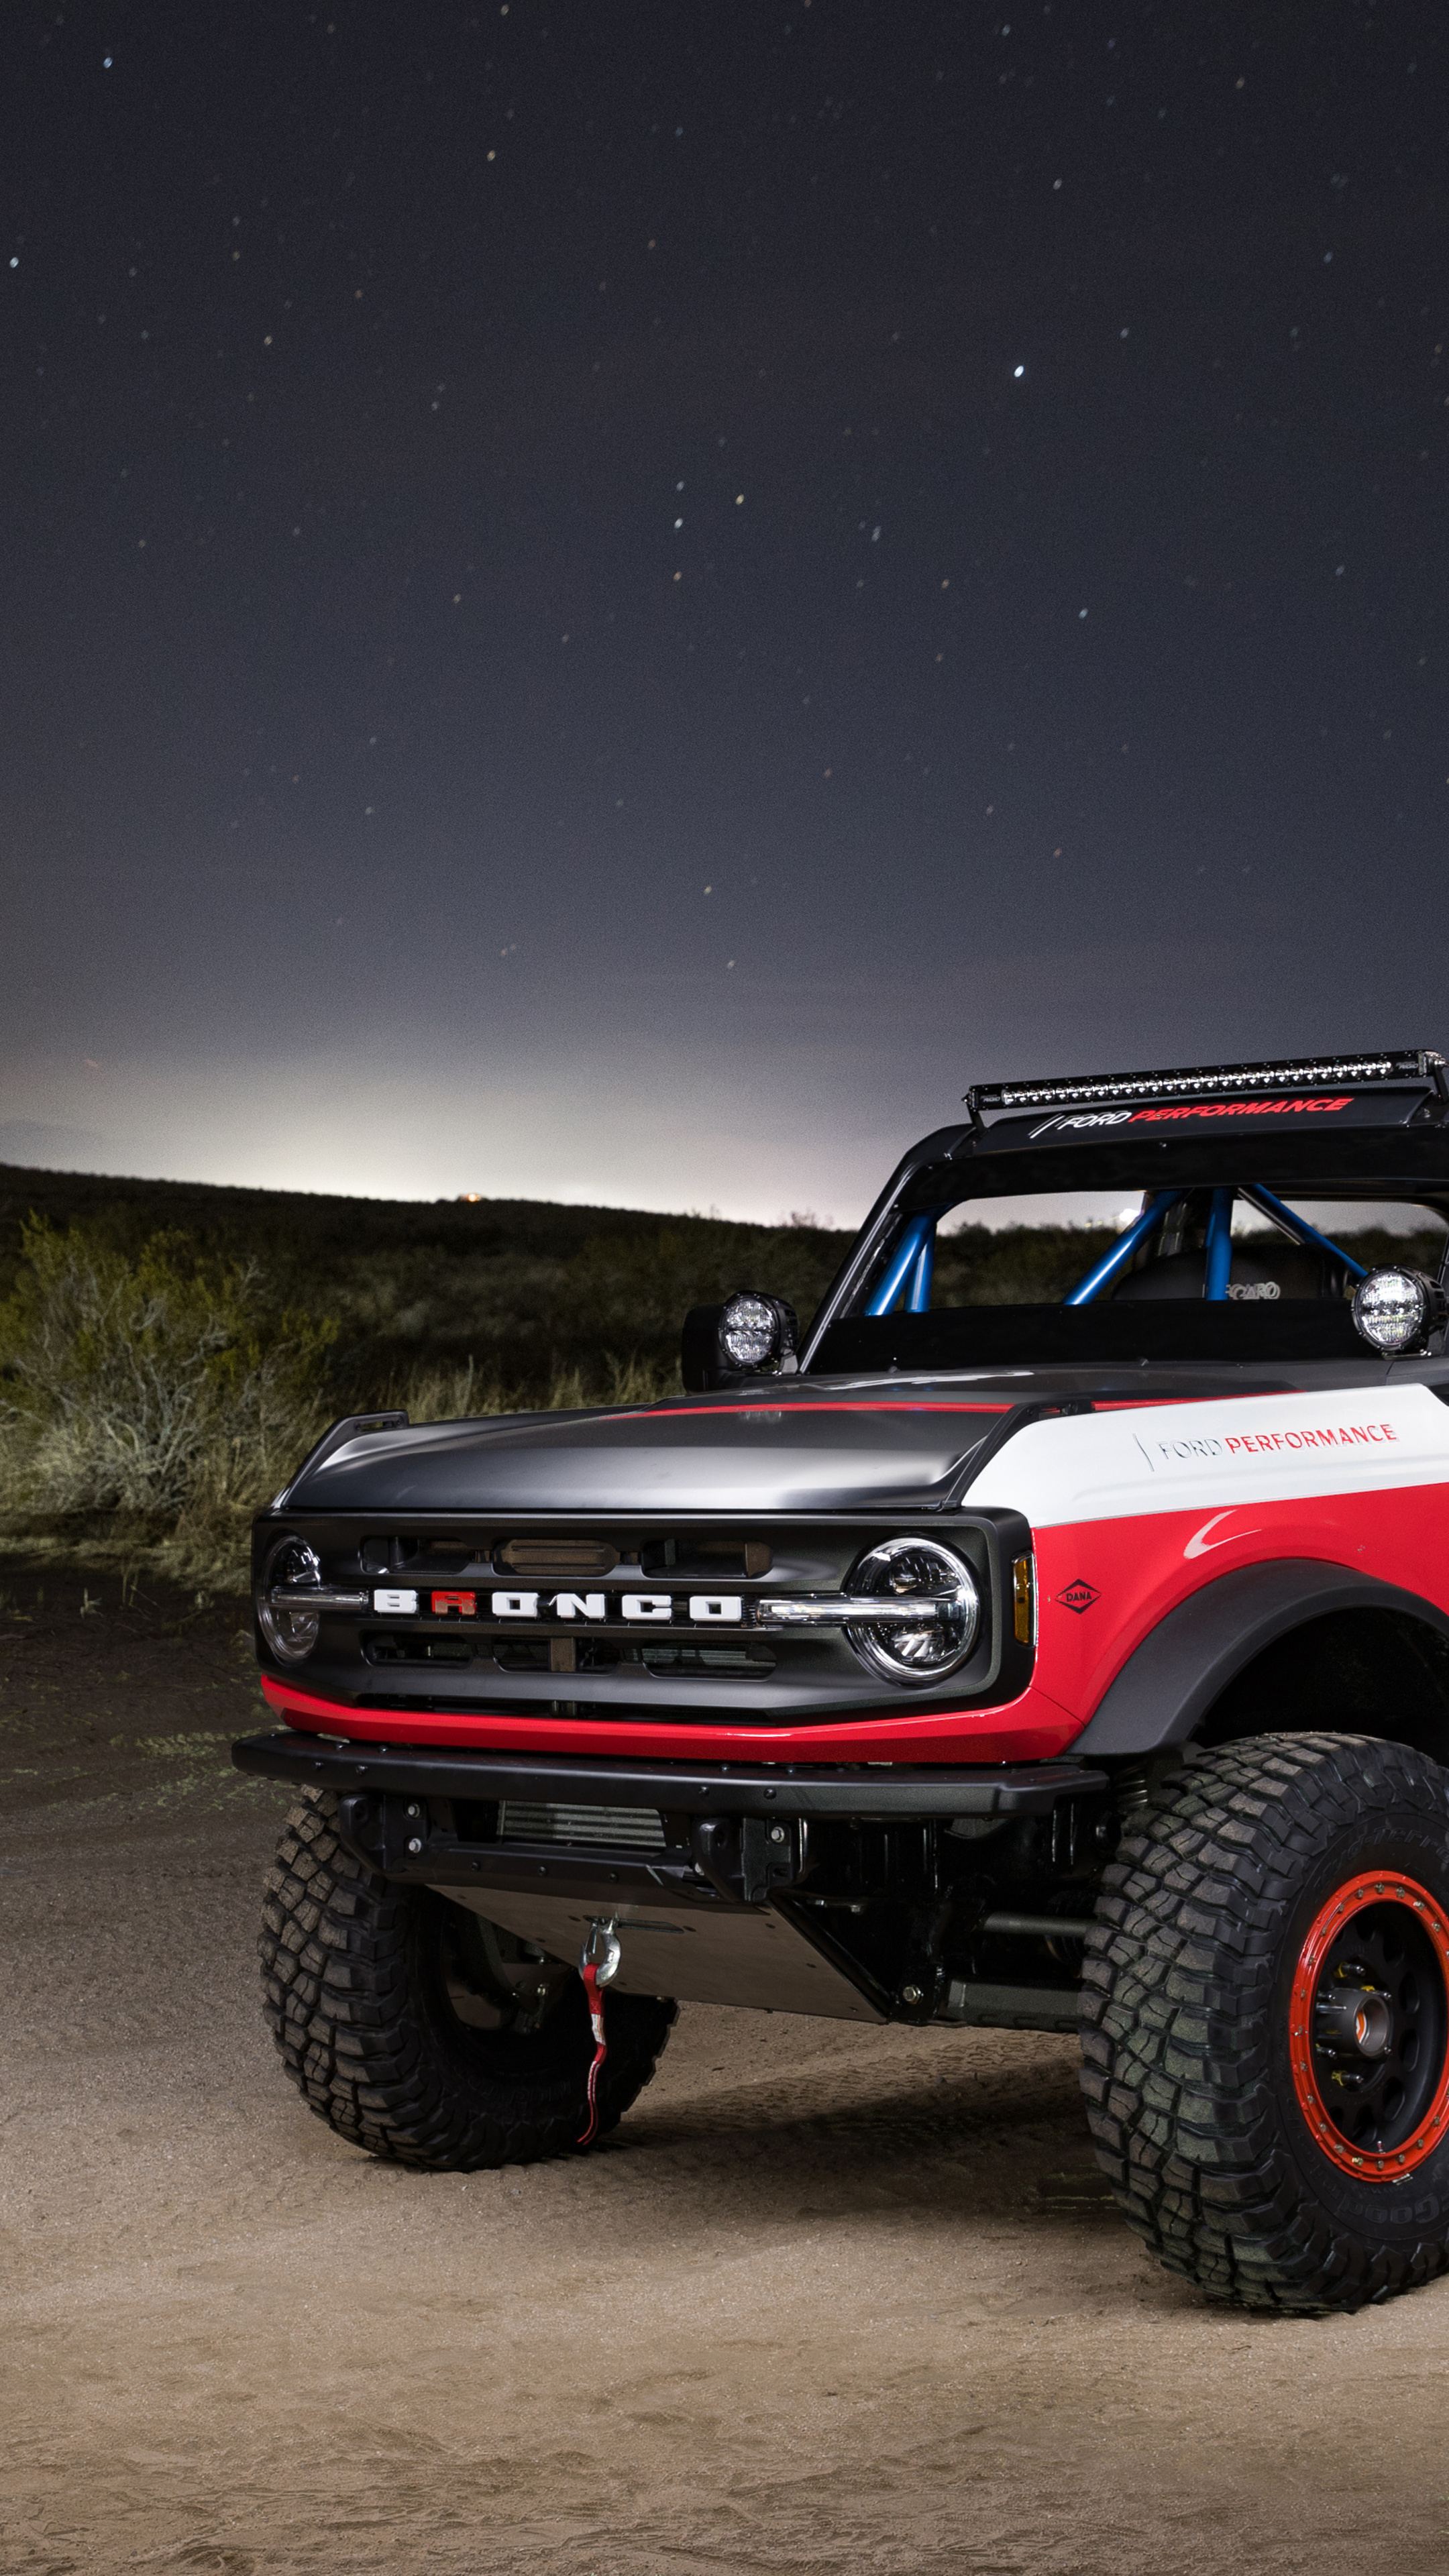 Ford Bronco: Bronco 4600 ULTRA4, Race Truck, Body With A Special Protective Coating, Johnson Valley, King of the Hammers, 2021. 2160x3840 4K Wallpaper.